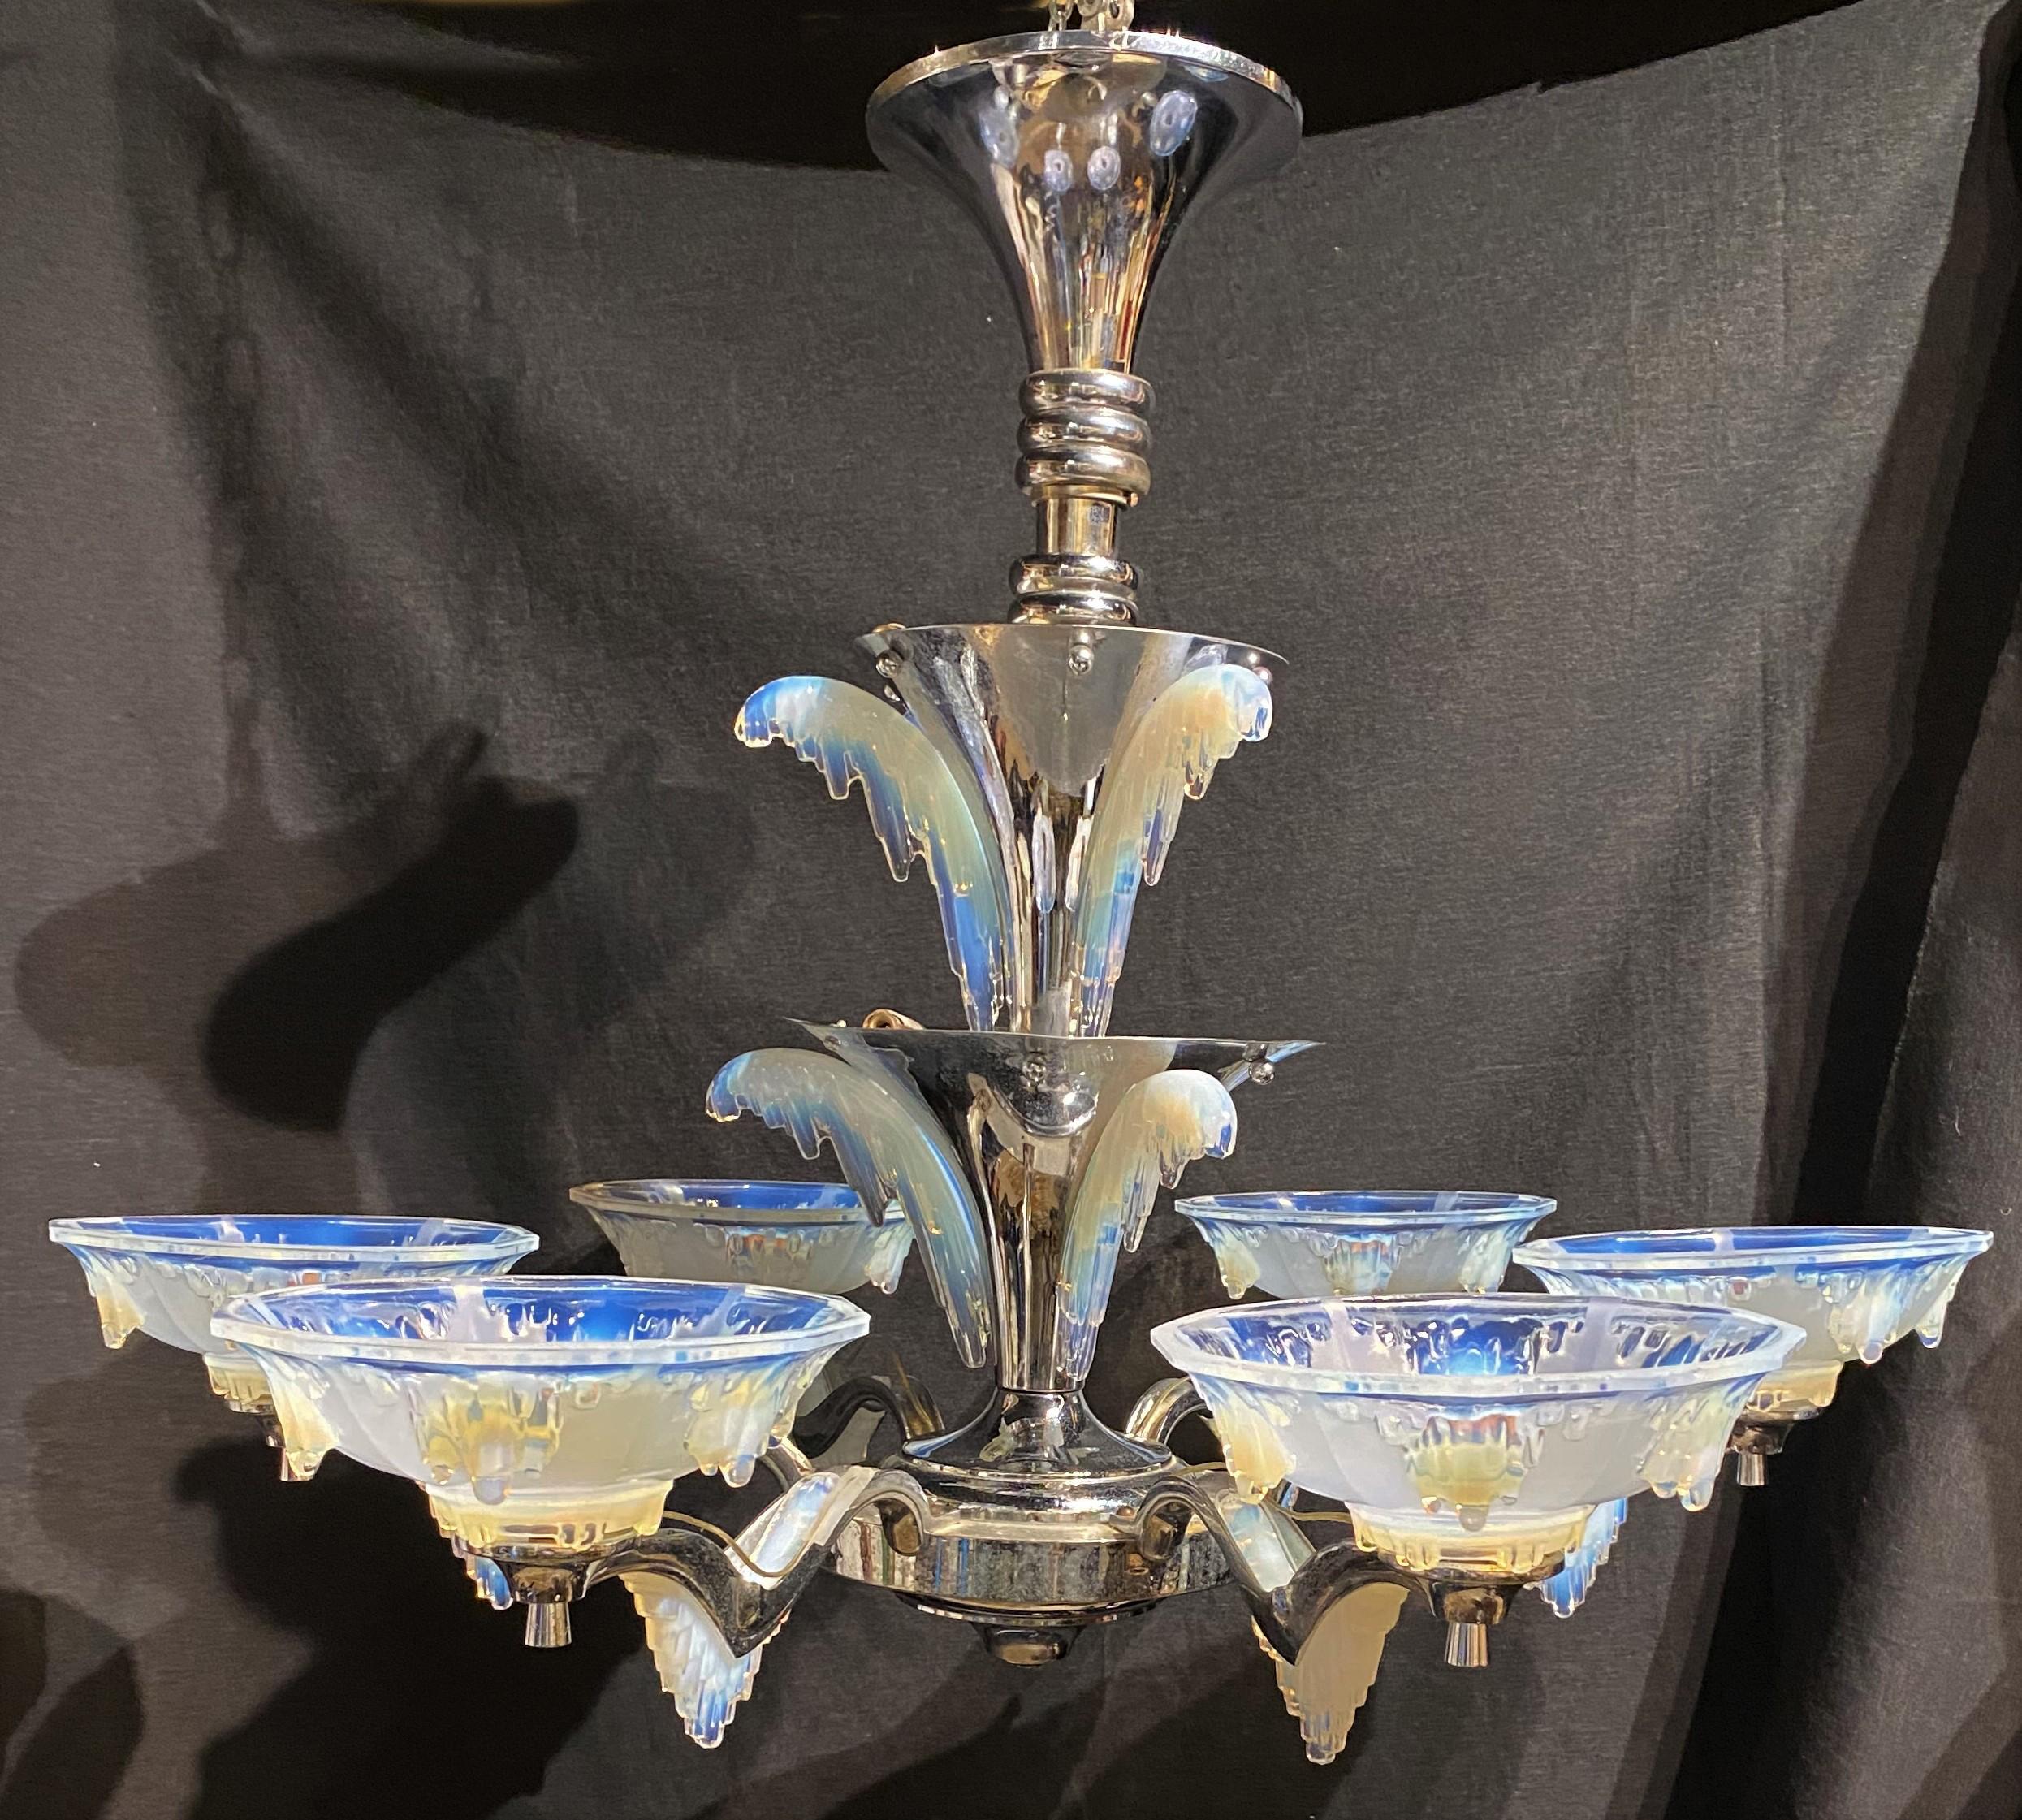 A stunning opalescent icicle glass Art Deco six light chandelier with nickel plated finish in the manner of Paris based designers Petitot & Ezan, circa 1930, for Atelier Petitot.  This three tier chandelier has two smaller upper tiers of icicles